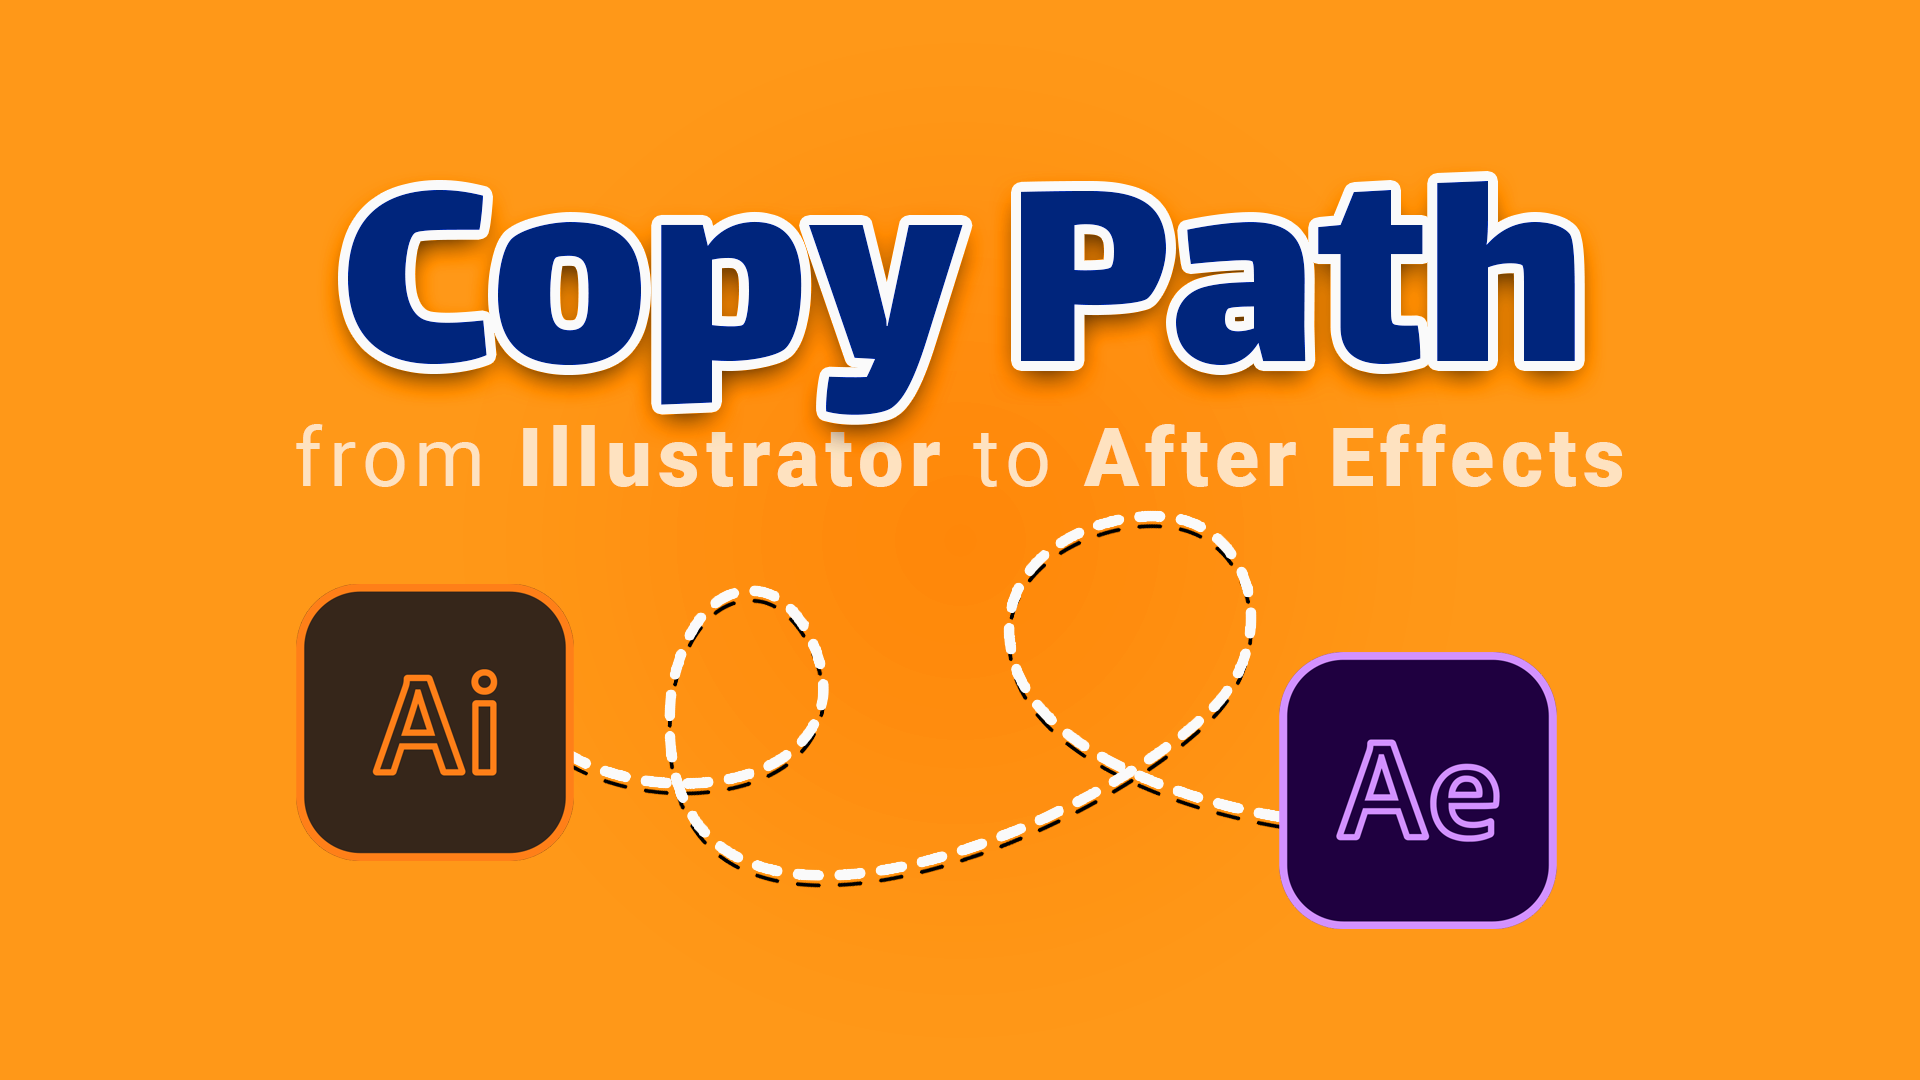 Copy Path from Illustrator to After Effects